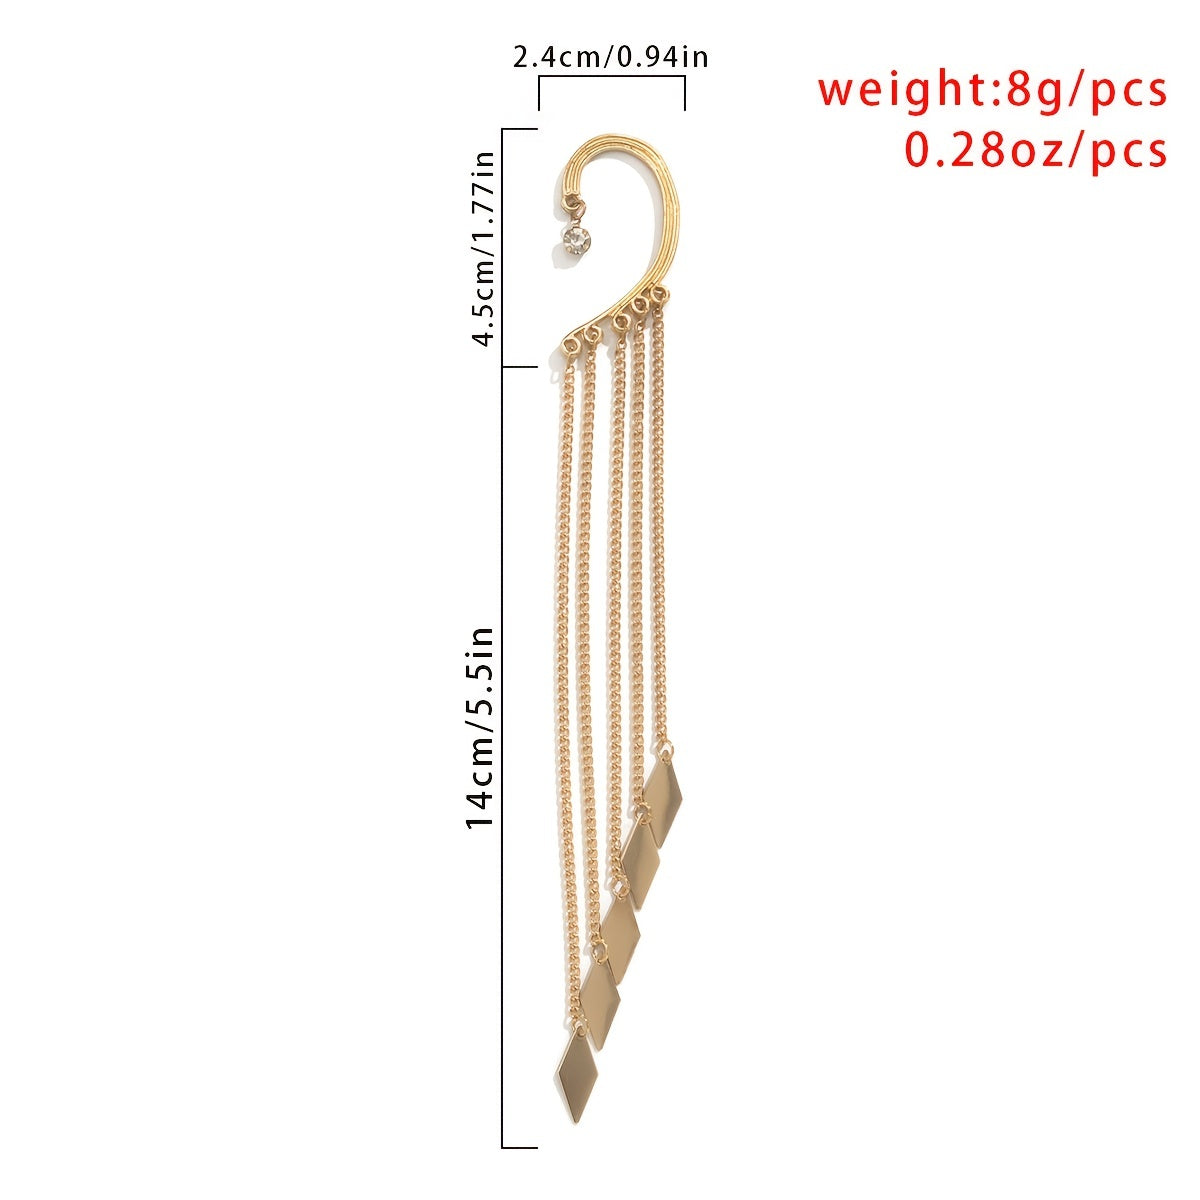 Glam Up Your Look with These Exaggerated Rivet Tassel Ear Cuffs - Perfect for Women and Girls!